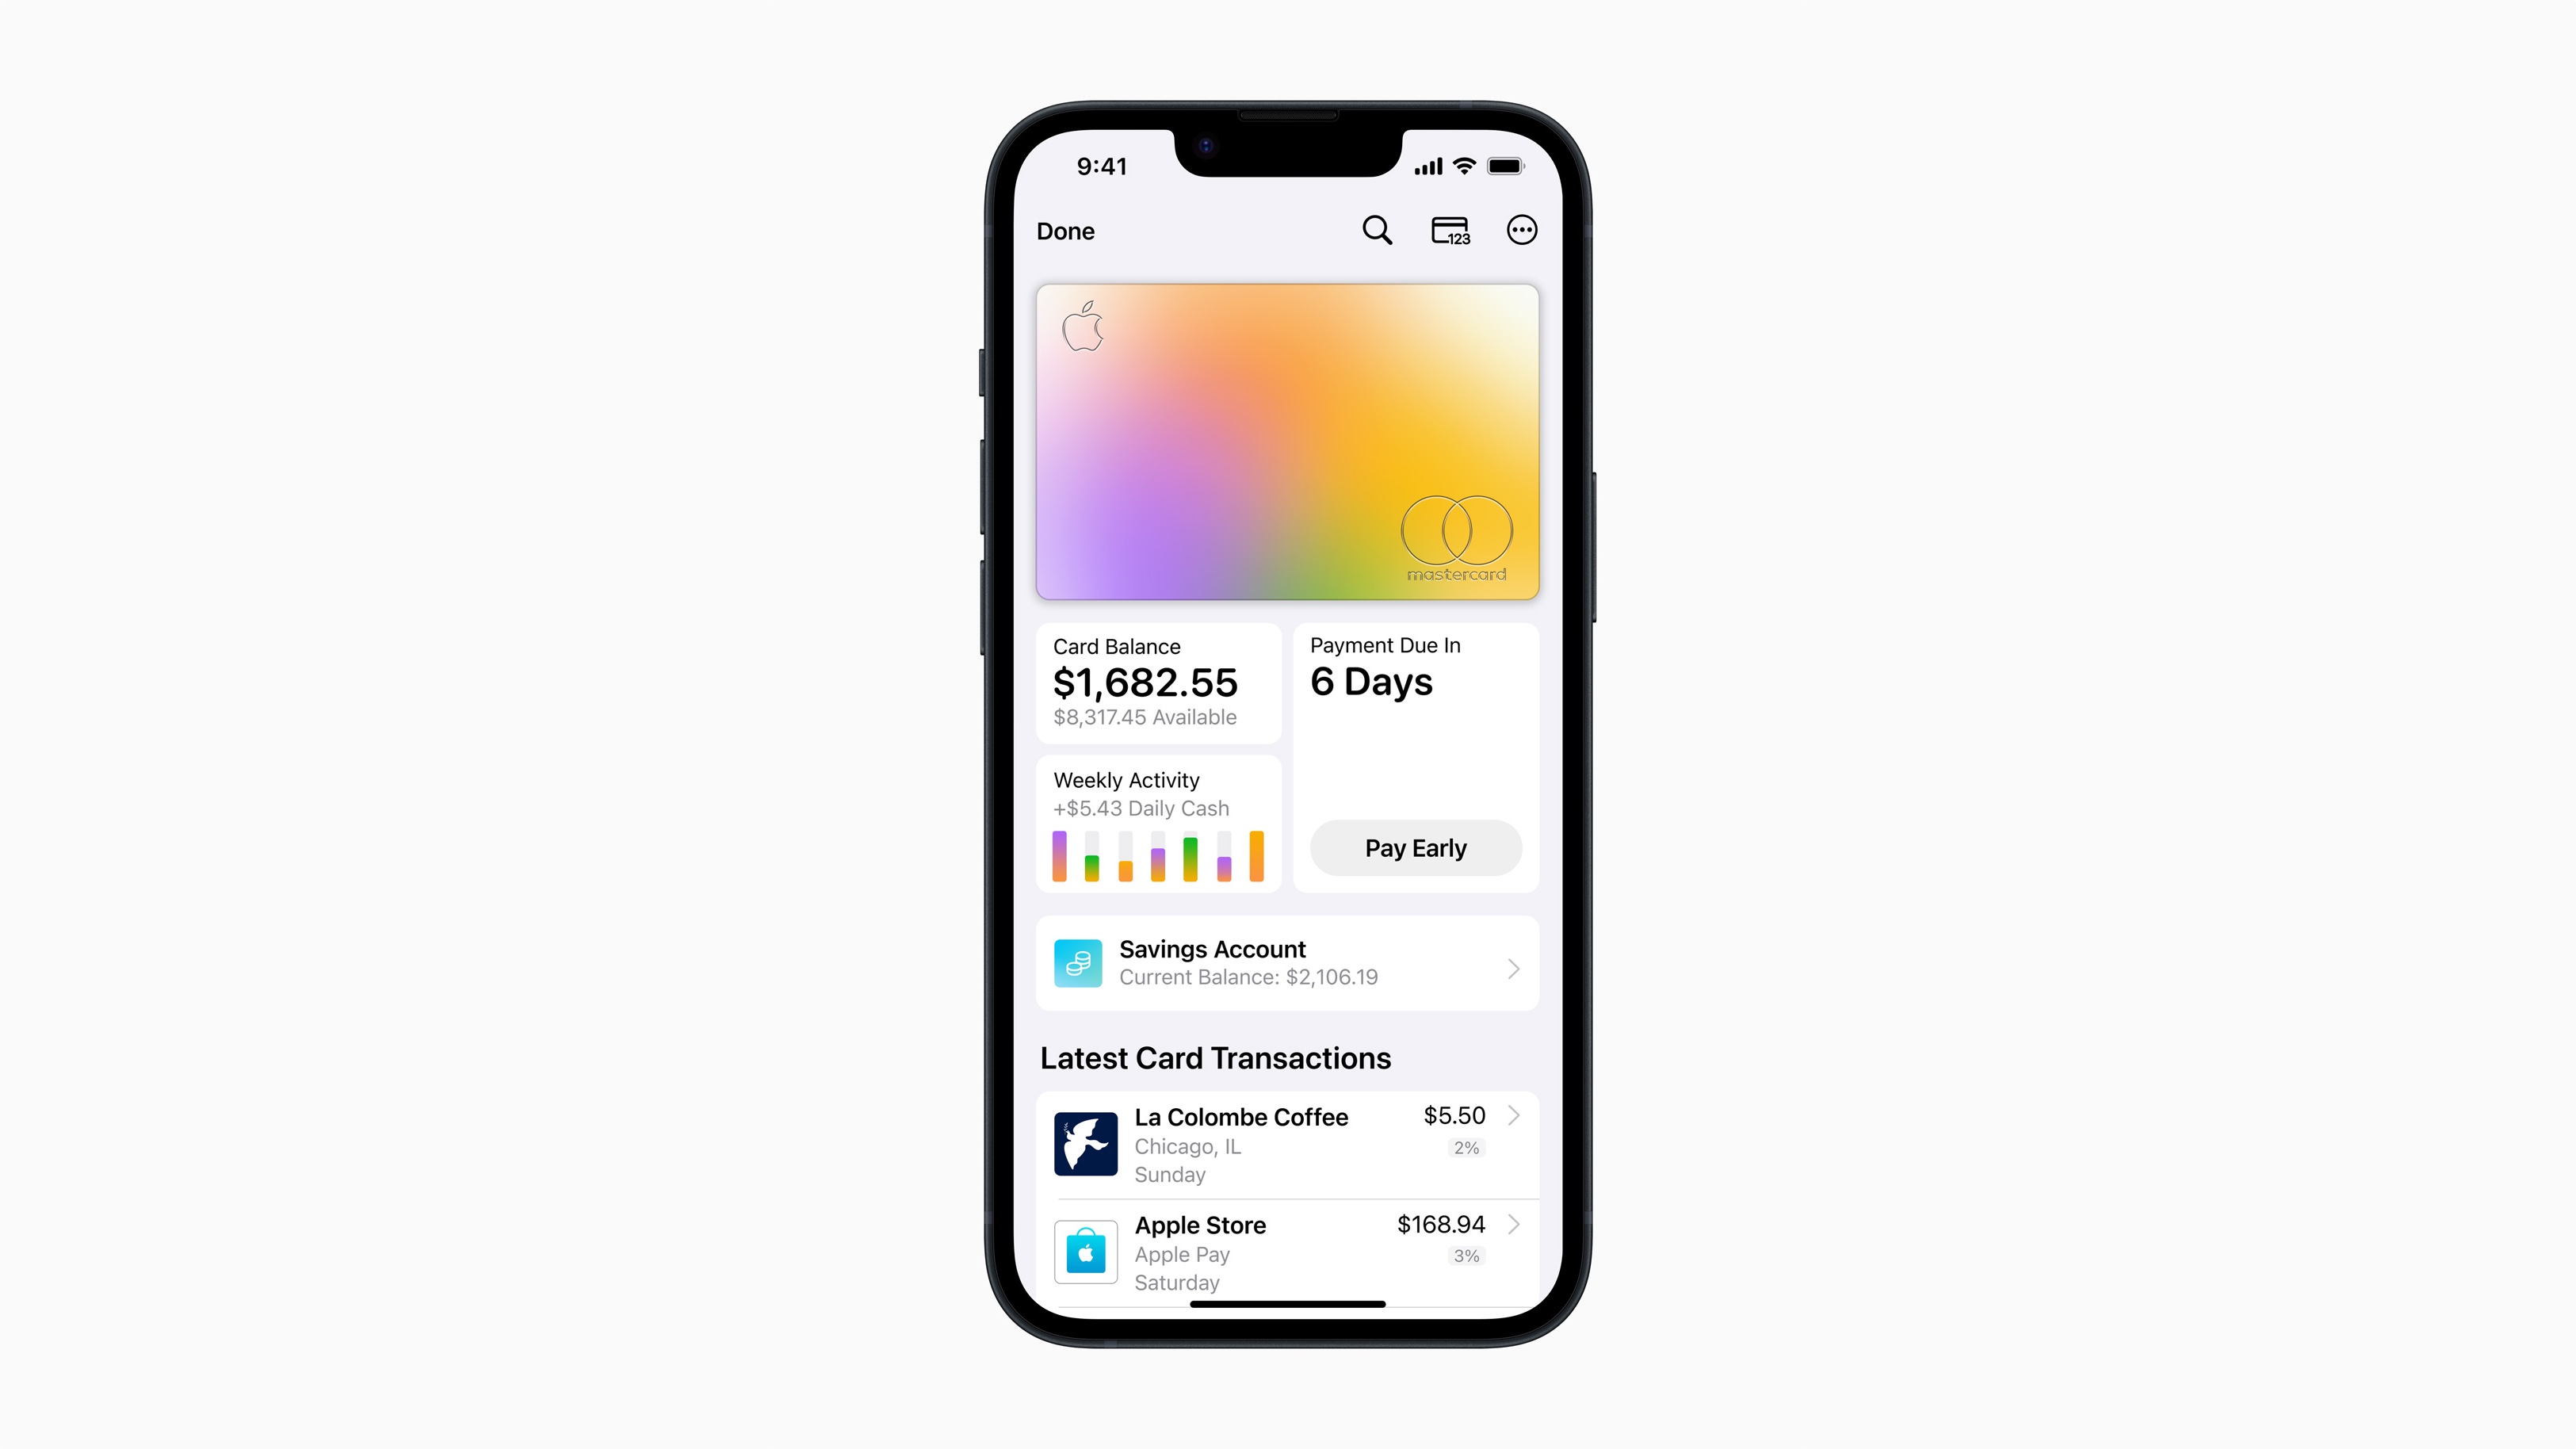 Apple Card users will be able to easily set up and manage Savings directly on their Apple Card in Wallet.